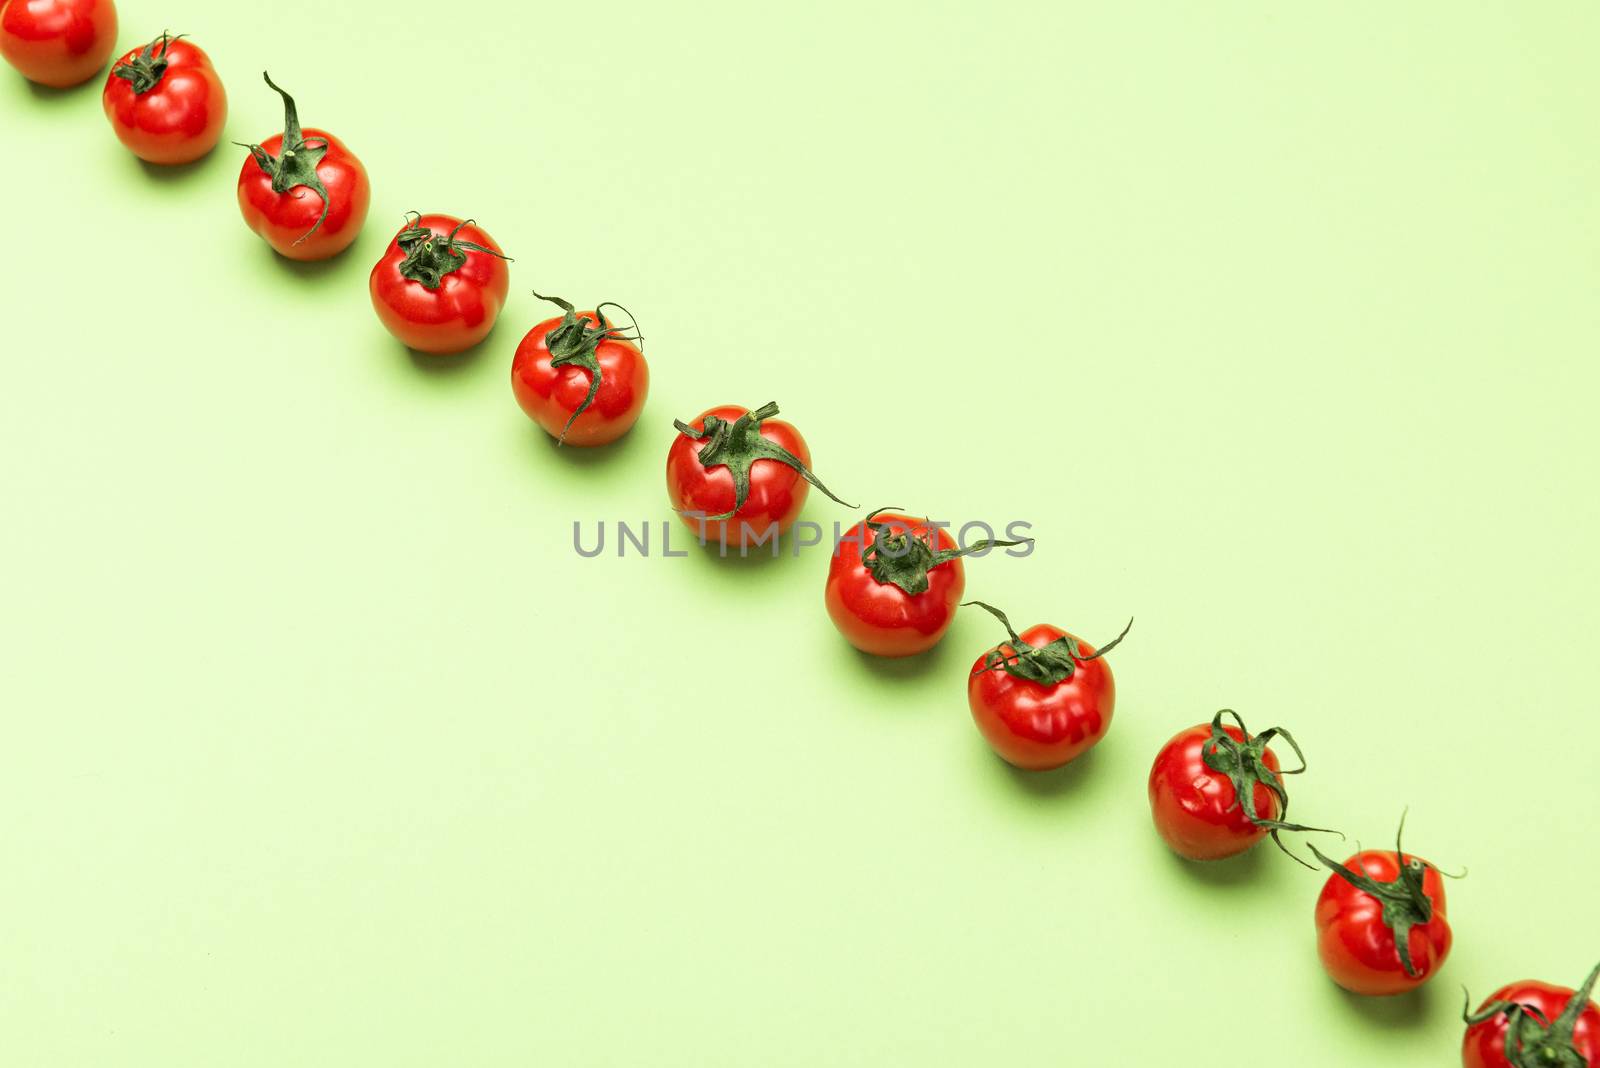 Vibrant Red Tomatoes on Green Background, Flat Lay Vegetable Pat by merc67